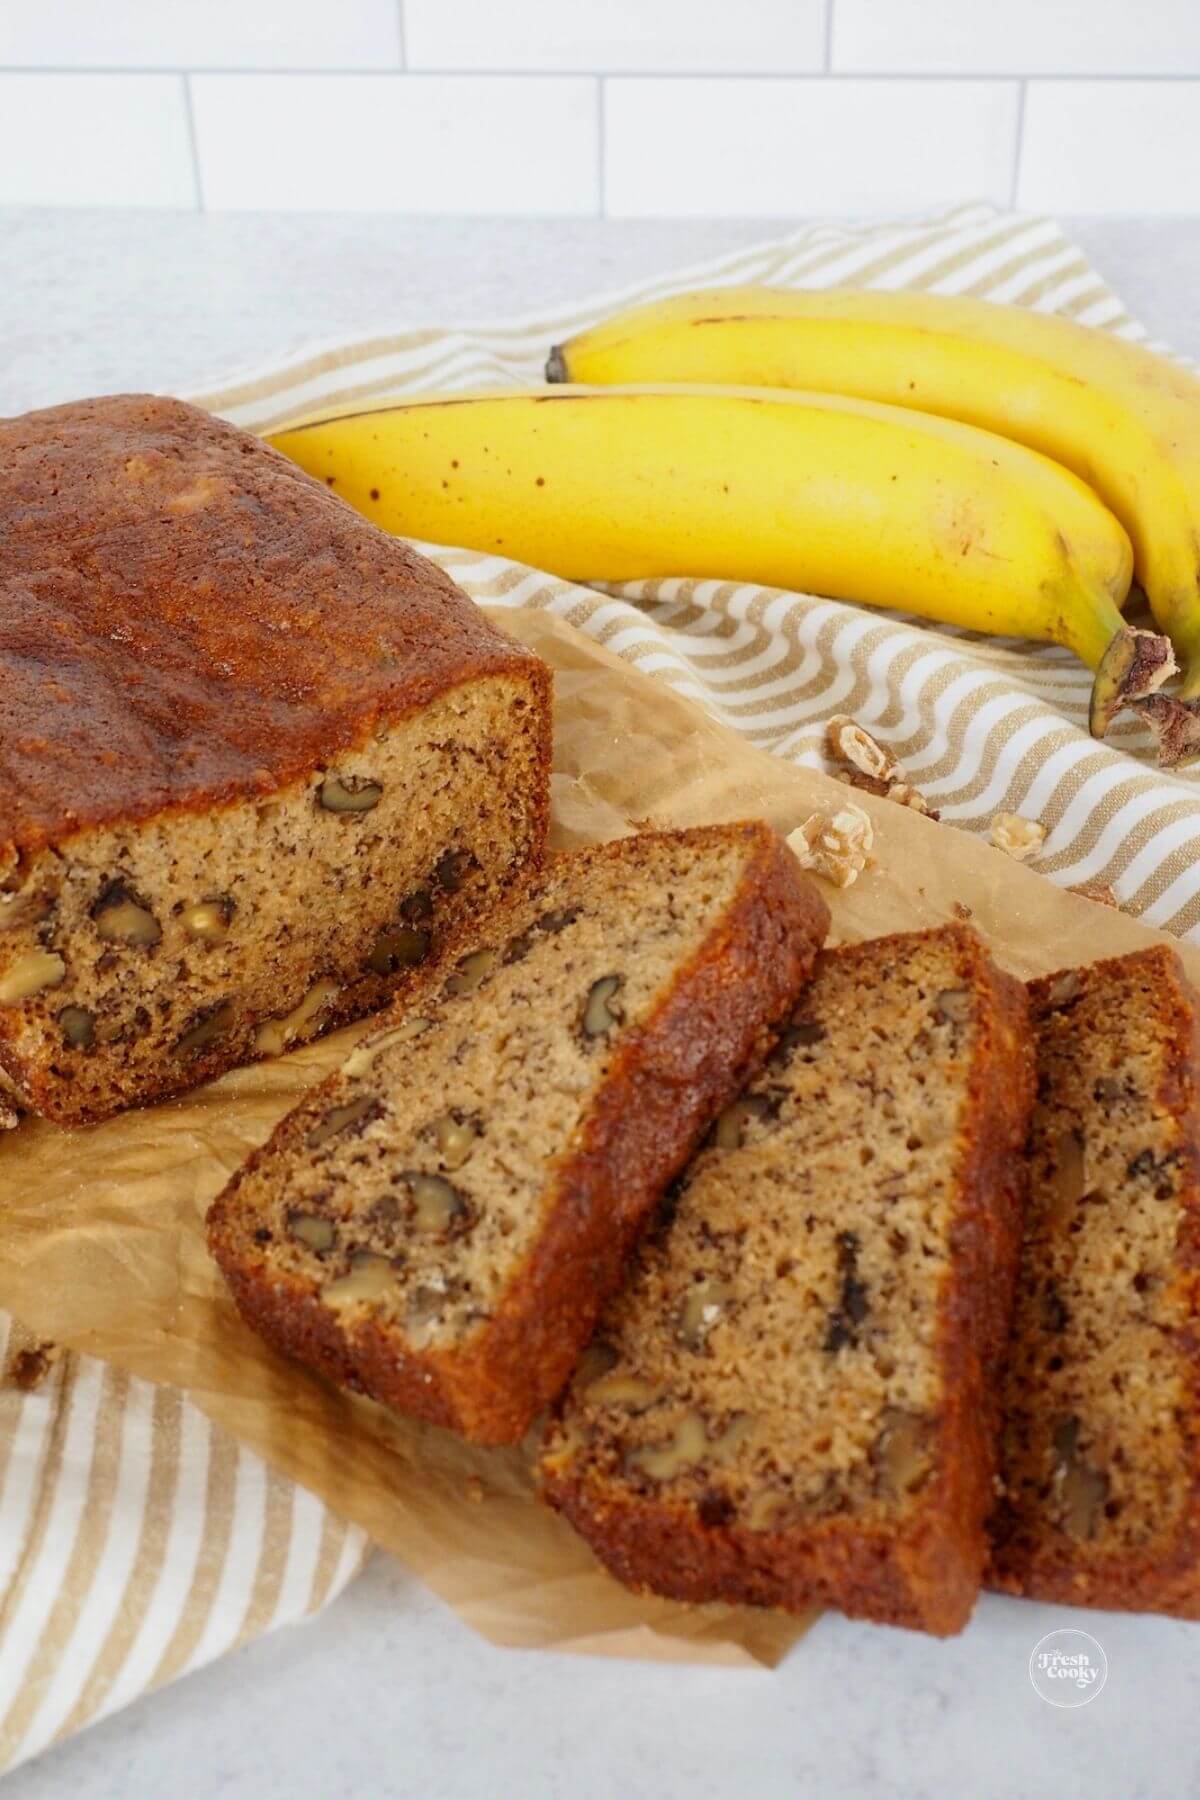 Slices on tray of high altitude banana bread with walnuts or chocolate chips with ripe bananas behind.